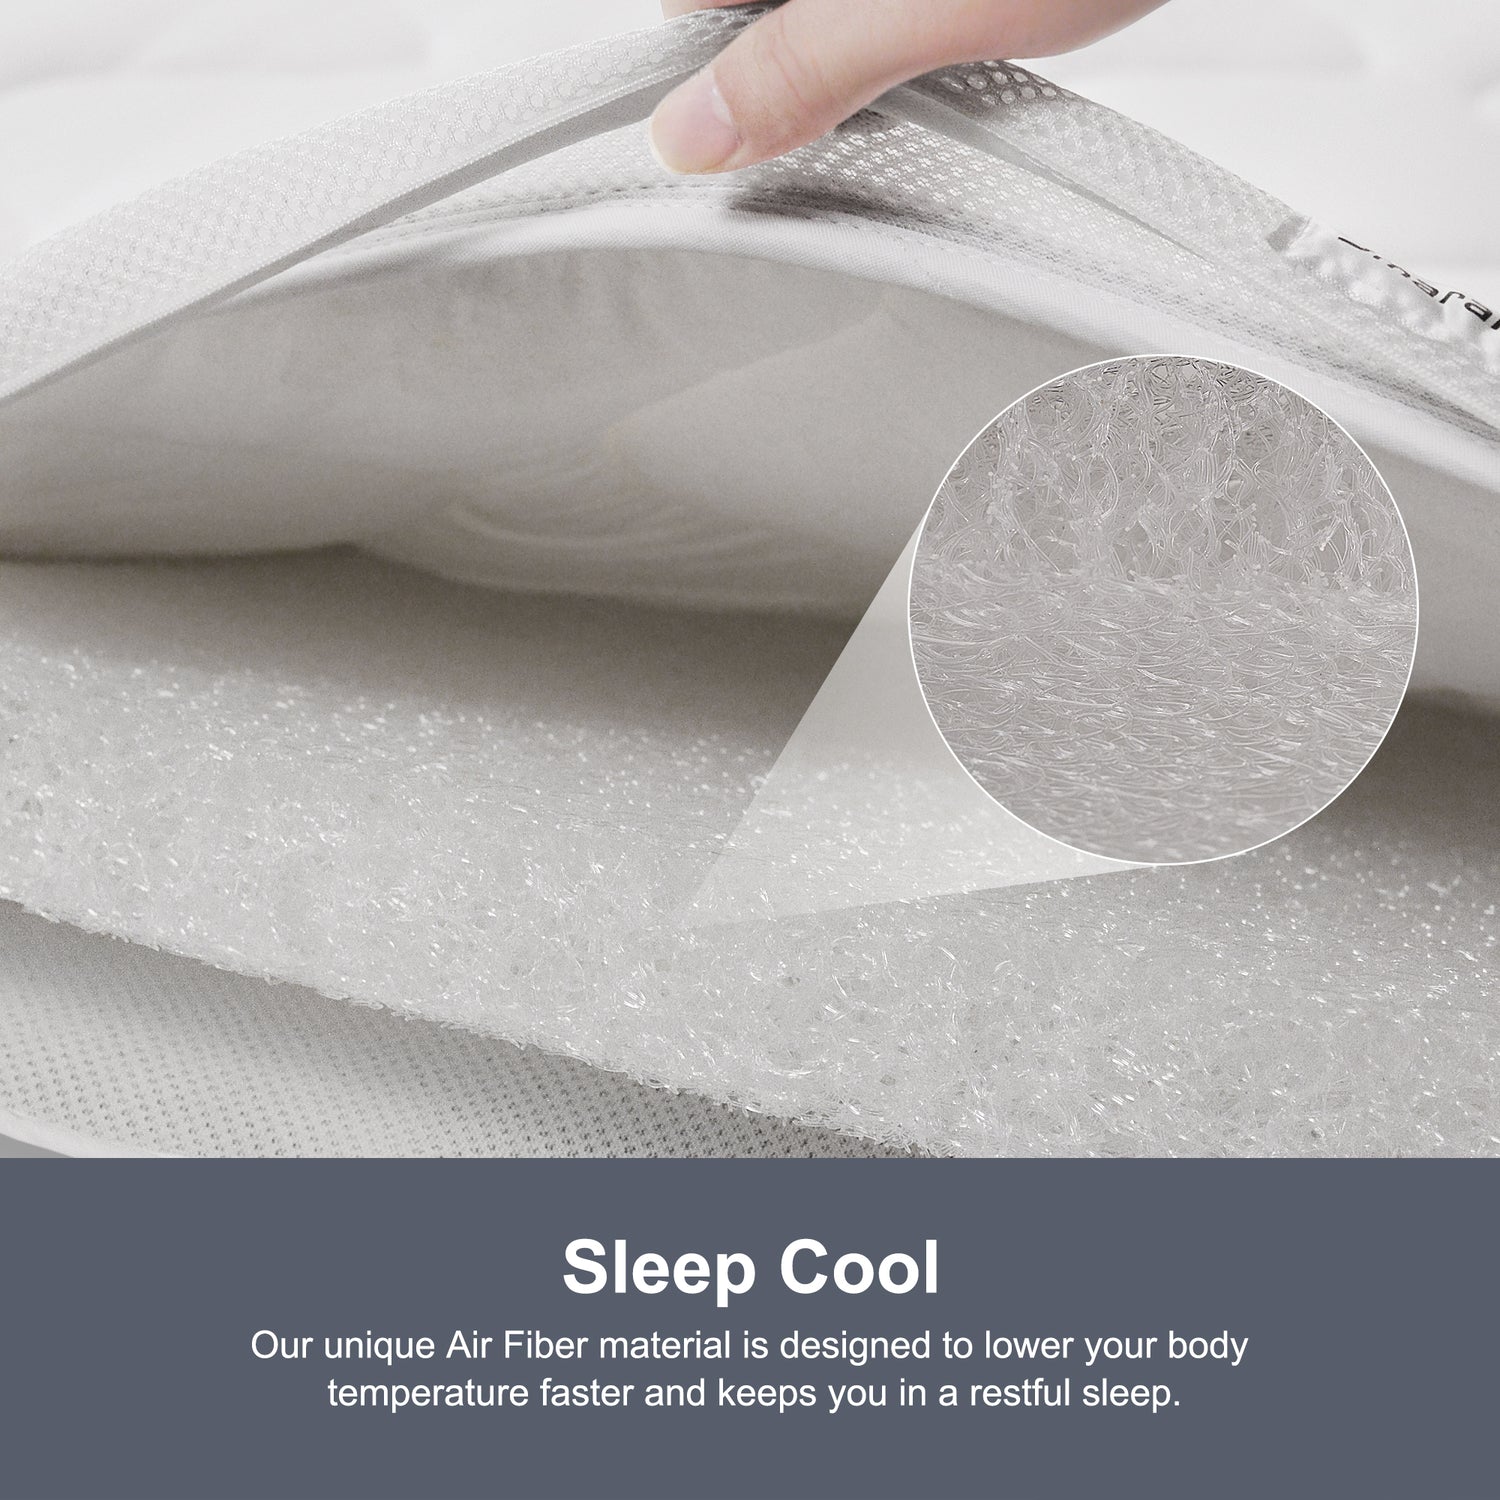 The Smafan Kaiteki 2.75 Inch Air Fiber Mattress Topper was inspired by those who suffer from chronic sleep ailments including painful muscles, stiff joints, and trouble falling and remaining asleep. Designed with an outer cover made of premium polyester and 3 inner cores made of innovative 4D Air Fiber material, the Kaiteki creates the optimal sleep conditions that can help mitigate pain and discomfort.